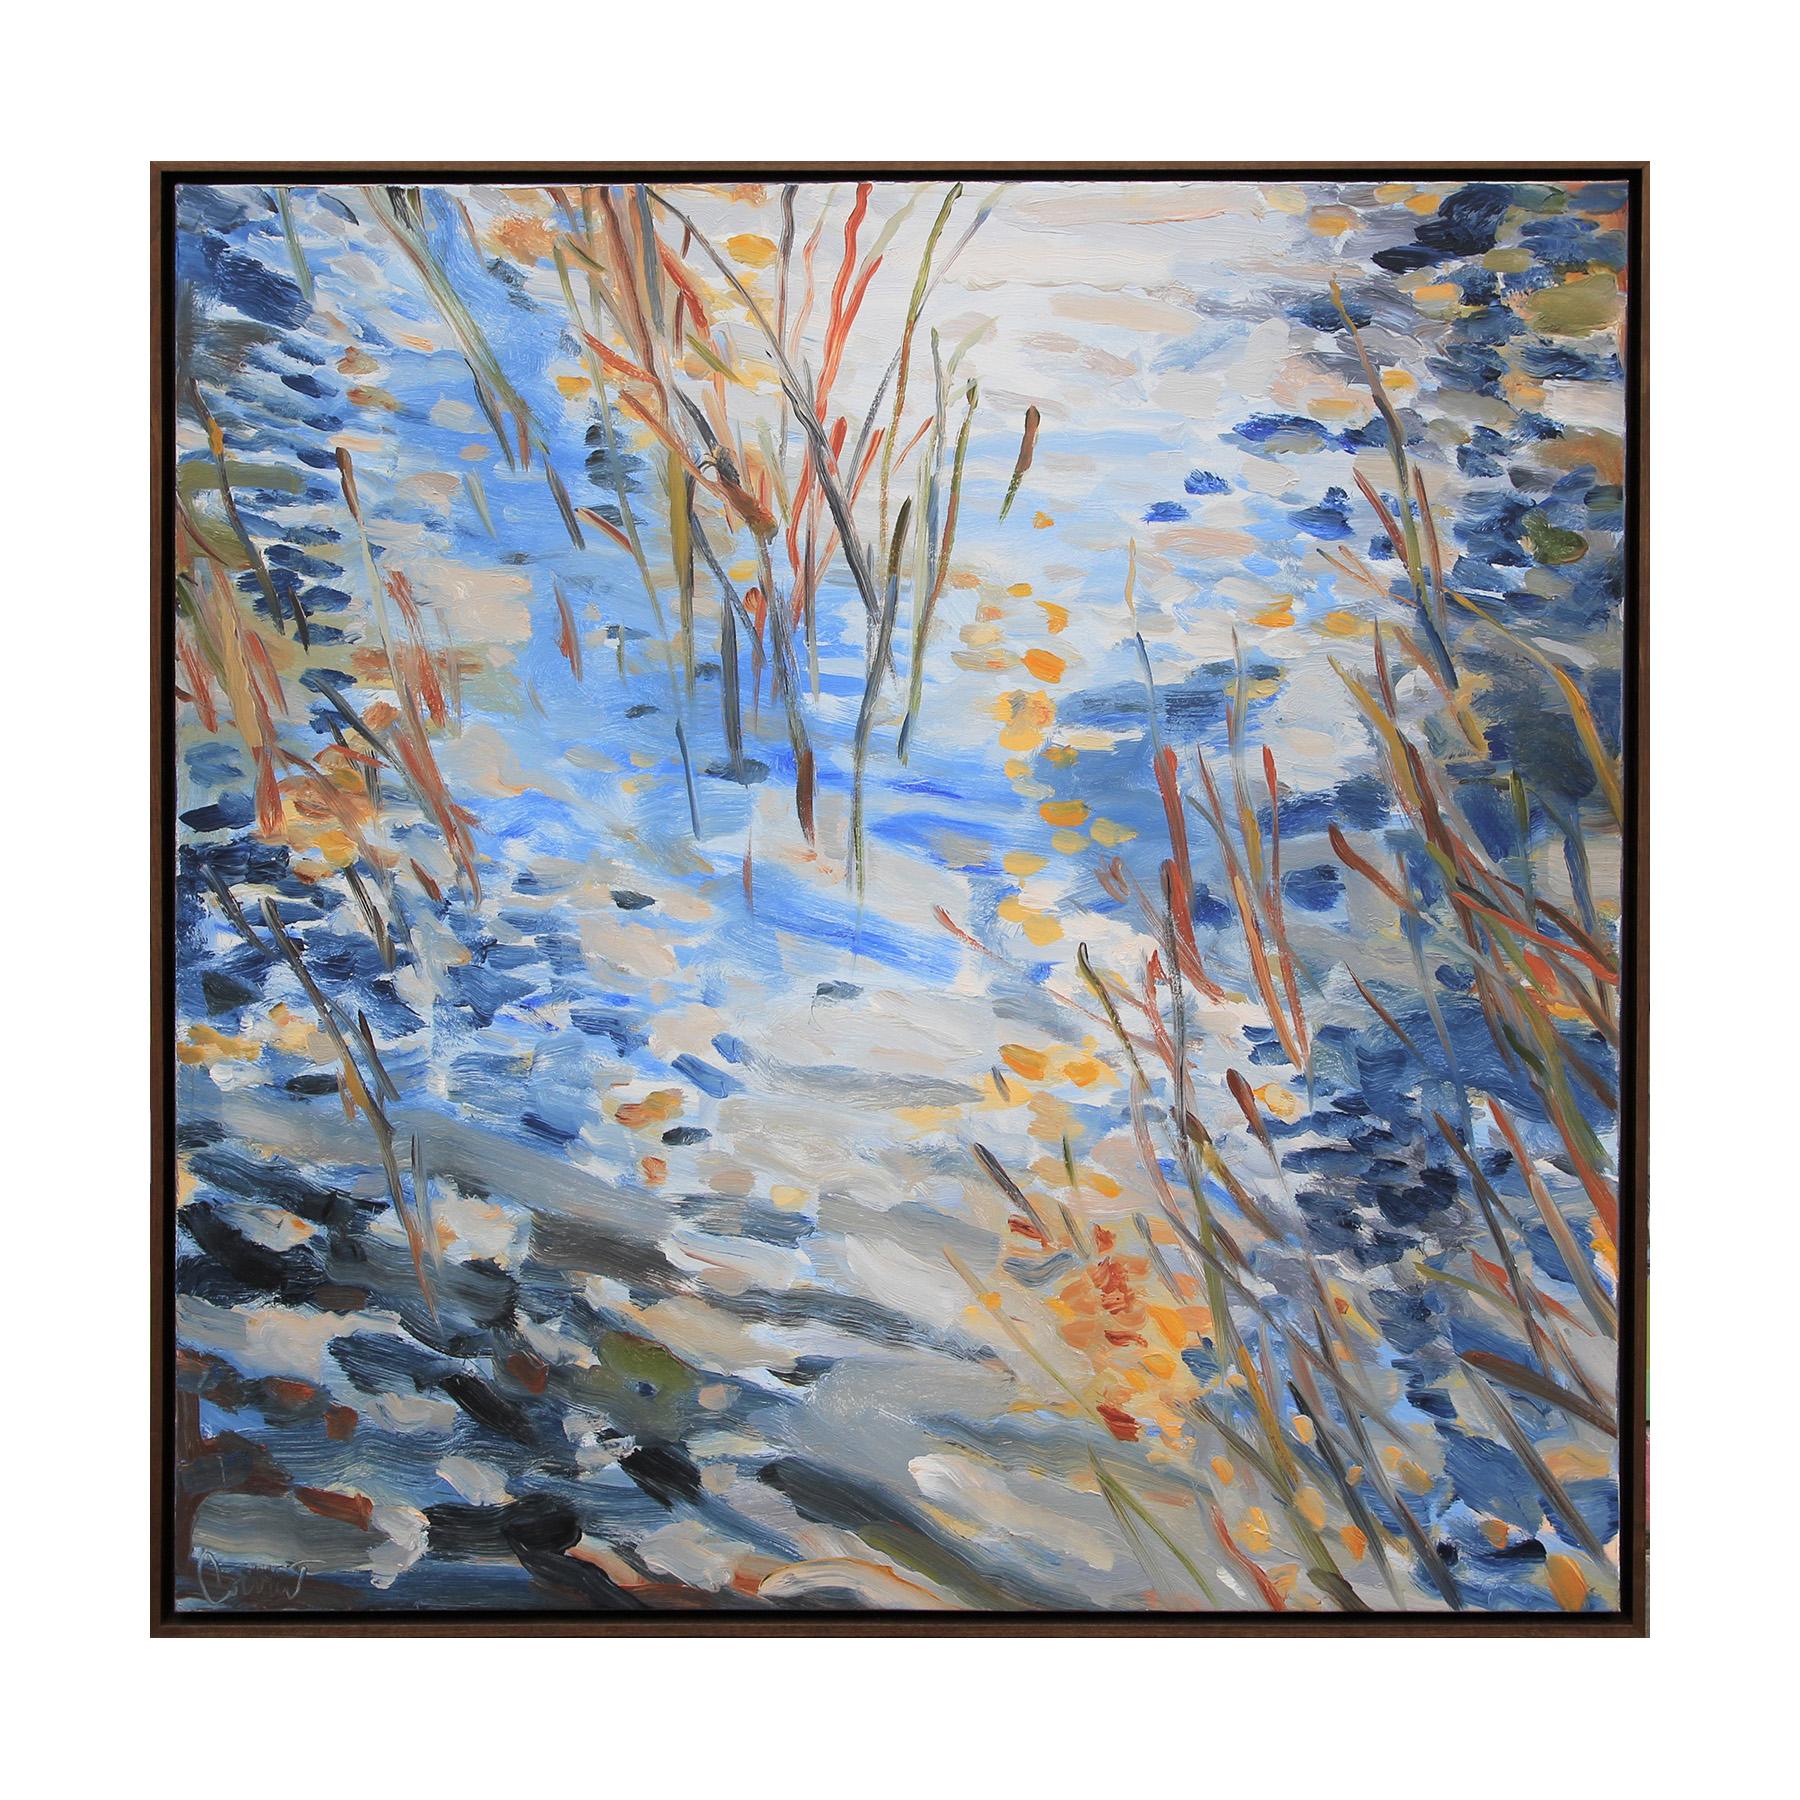 Ted Cowart Landscape Painting - "Misty Morning Pond" Blue and Yellow Abstract Impressionist Water Scene 